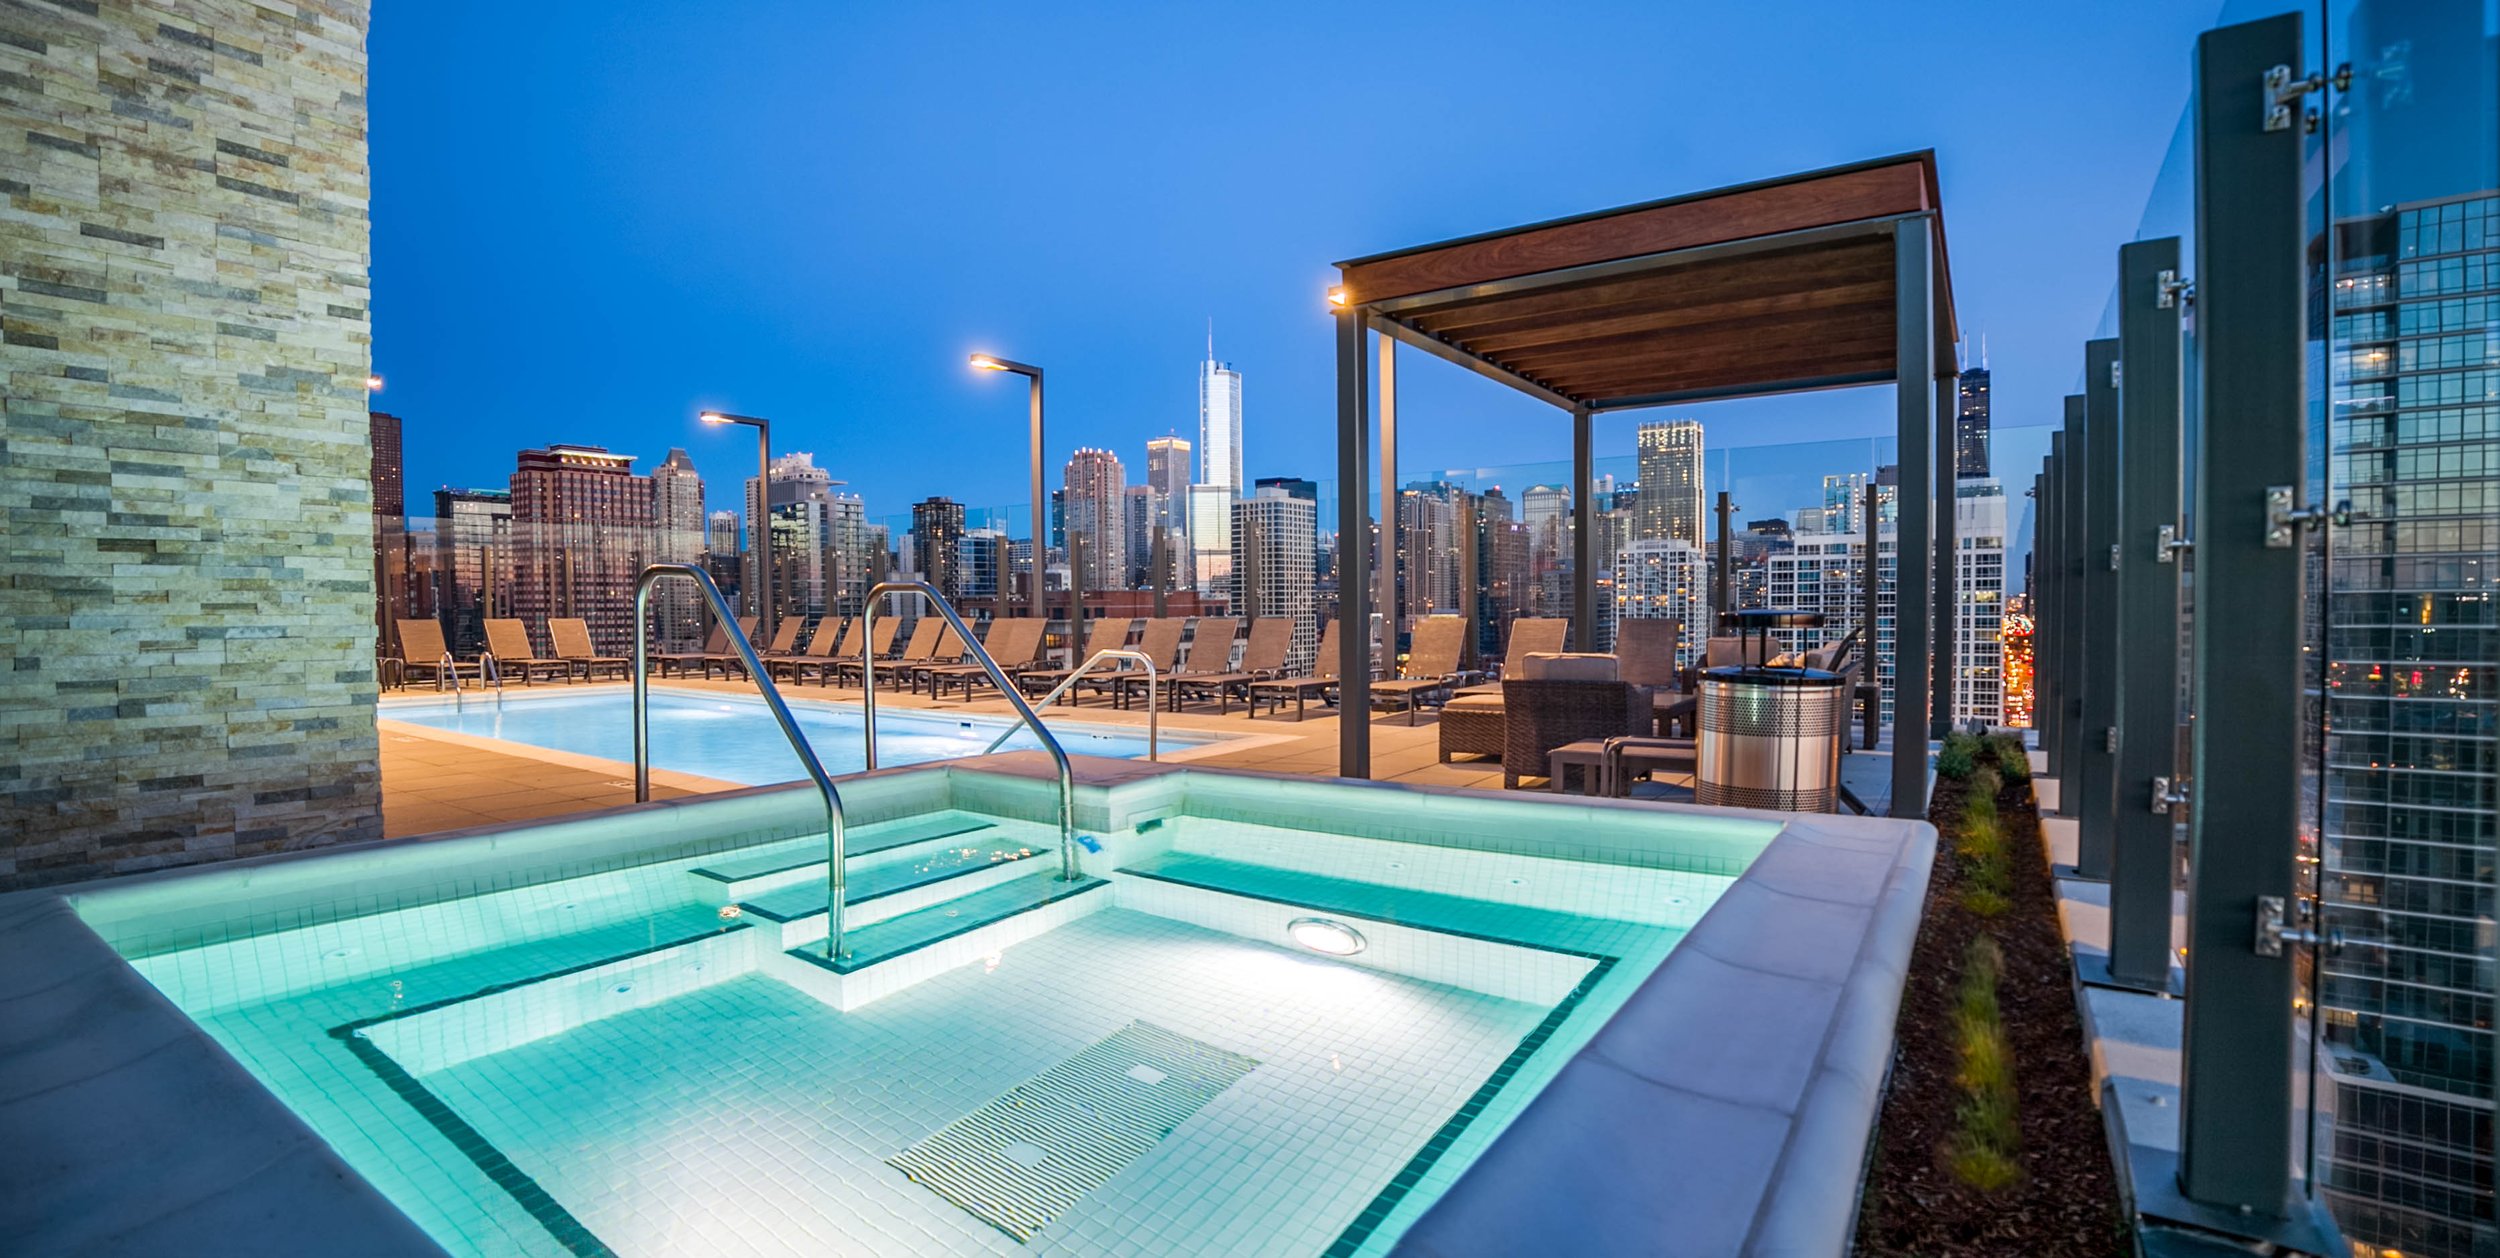 Rooftop Hot Tub